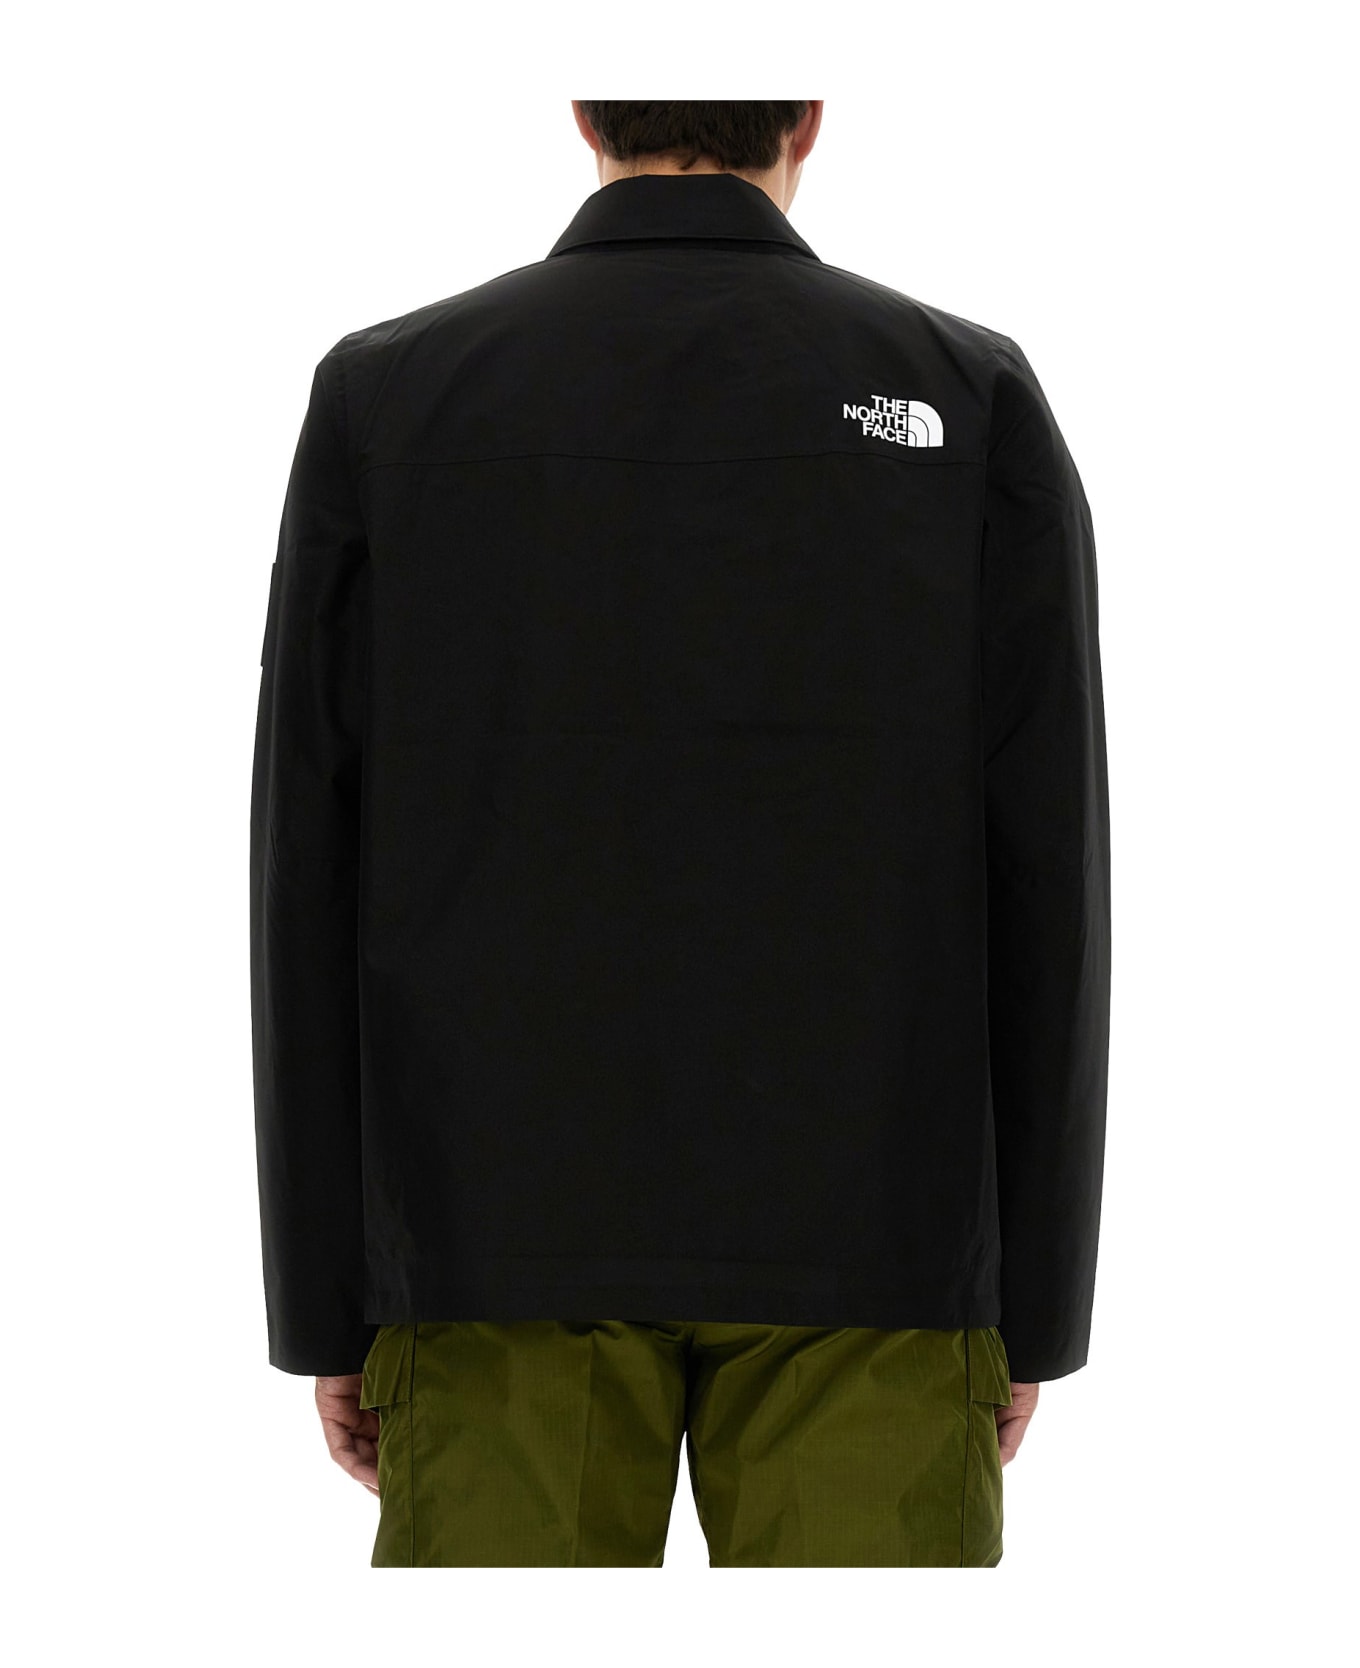 The North Face Jacket With Logo ジャケット